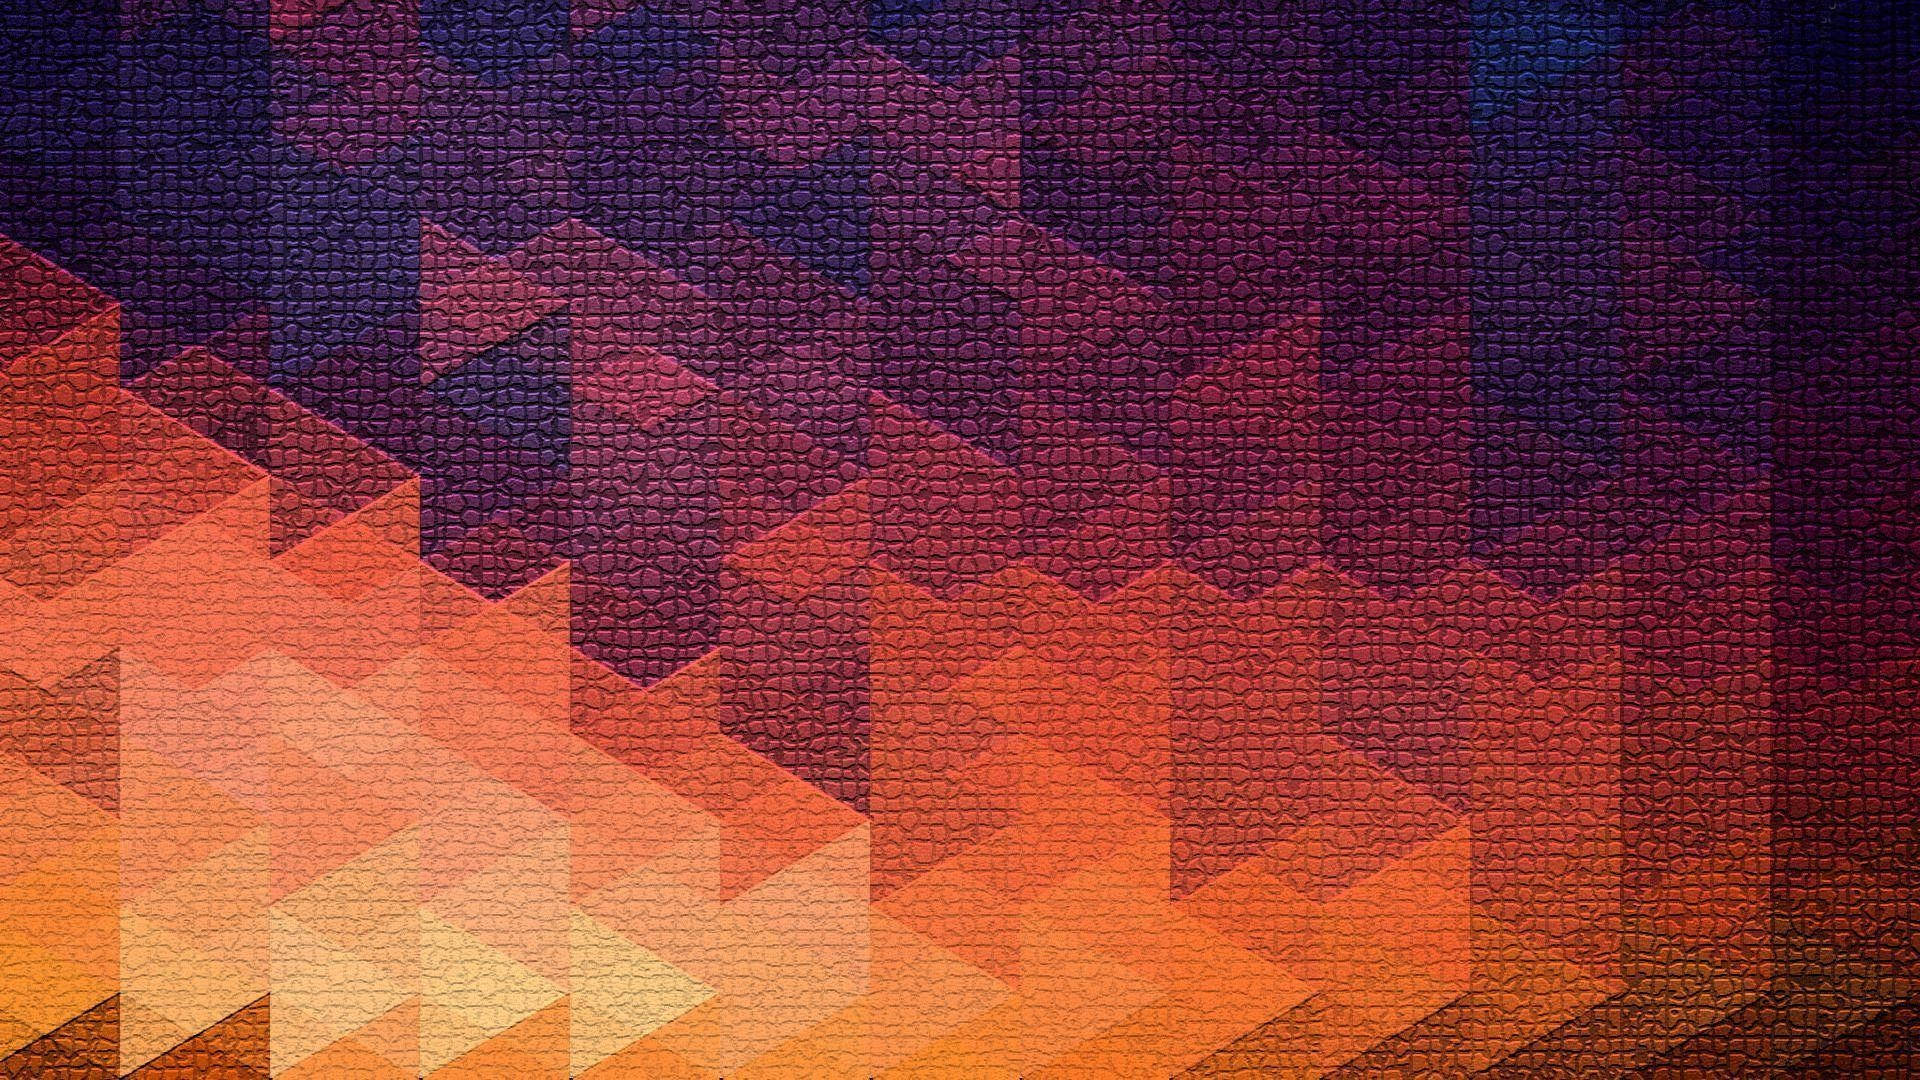 Textured And Gradient Mosaic Wallpaper